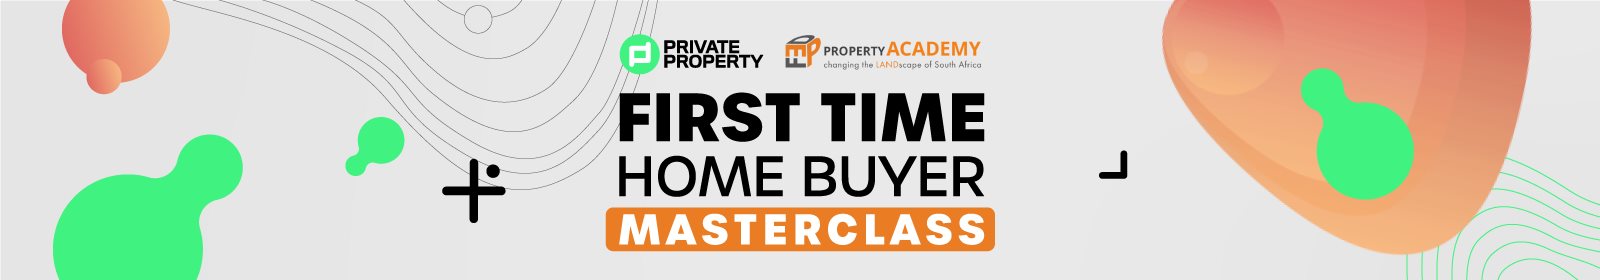 First Time Home Buyer Masterclass